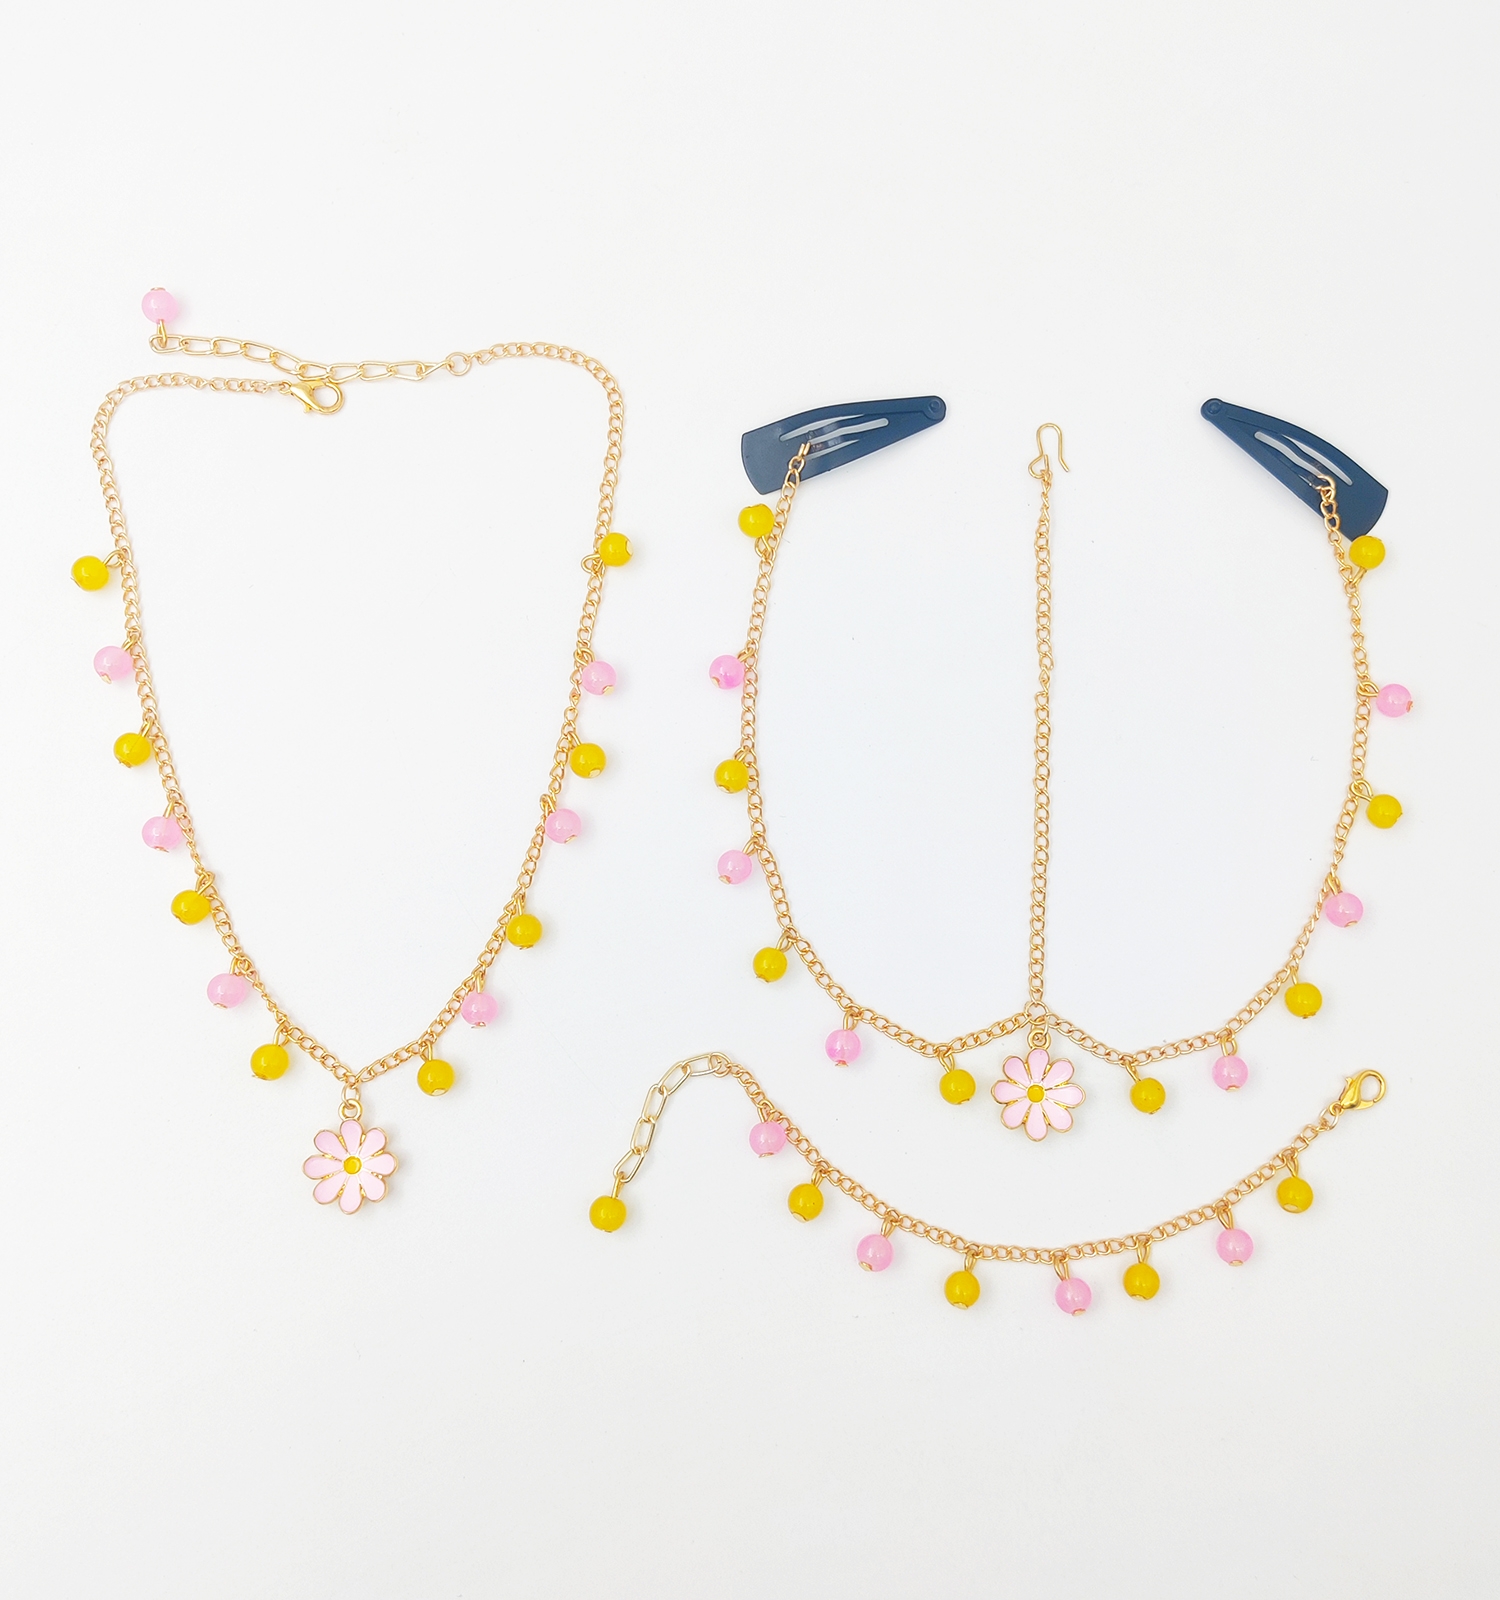 Gulbahar Charmed Necklace, Bracelet & Head Chain Set - Pink, Yellow